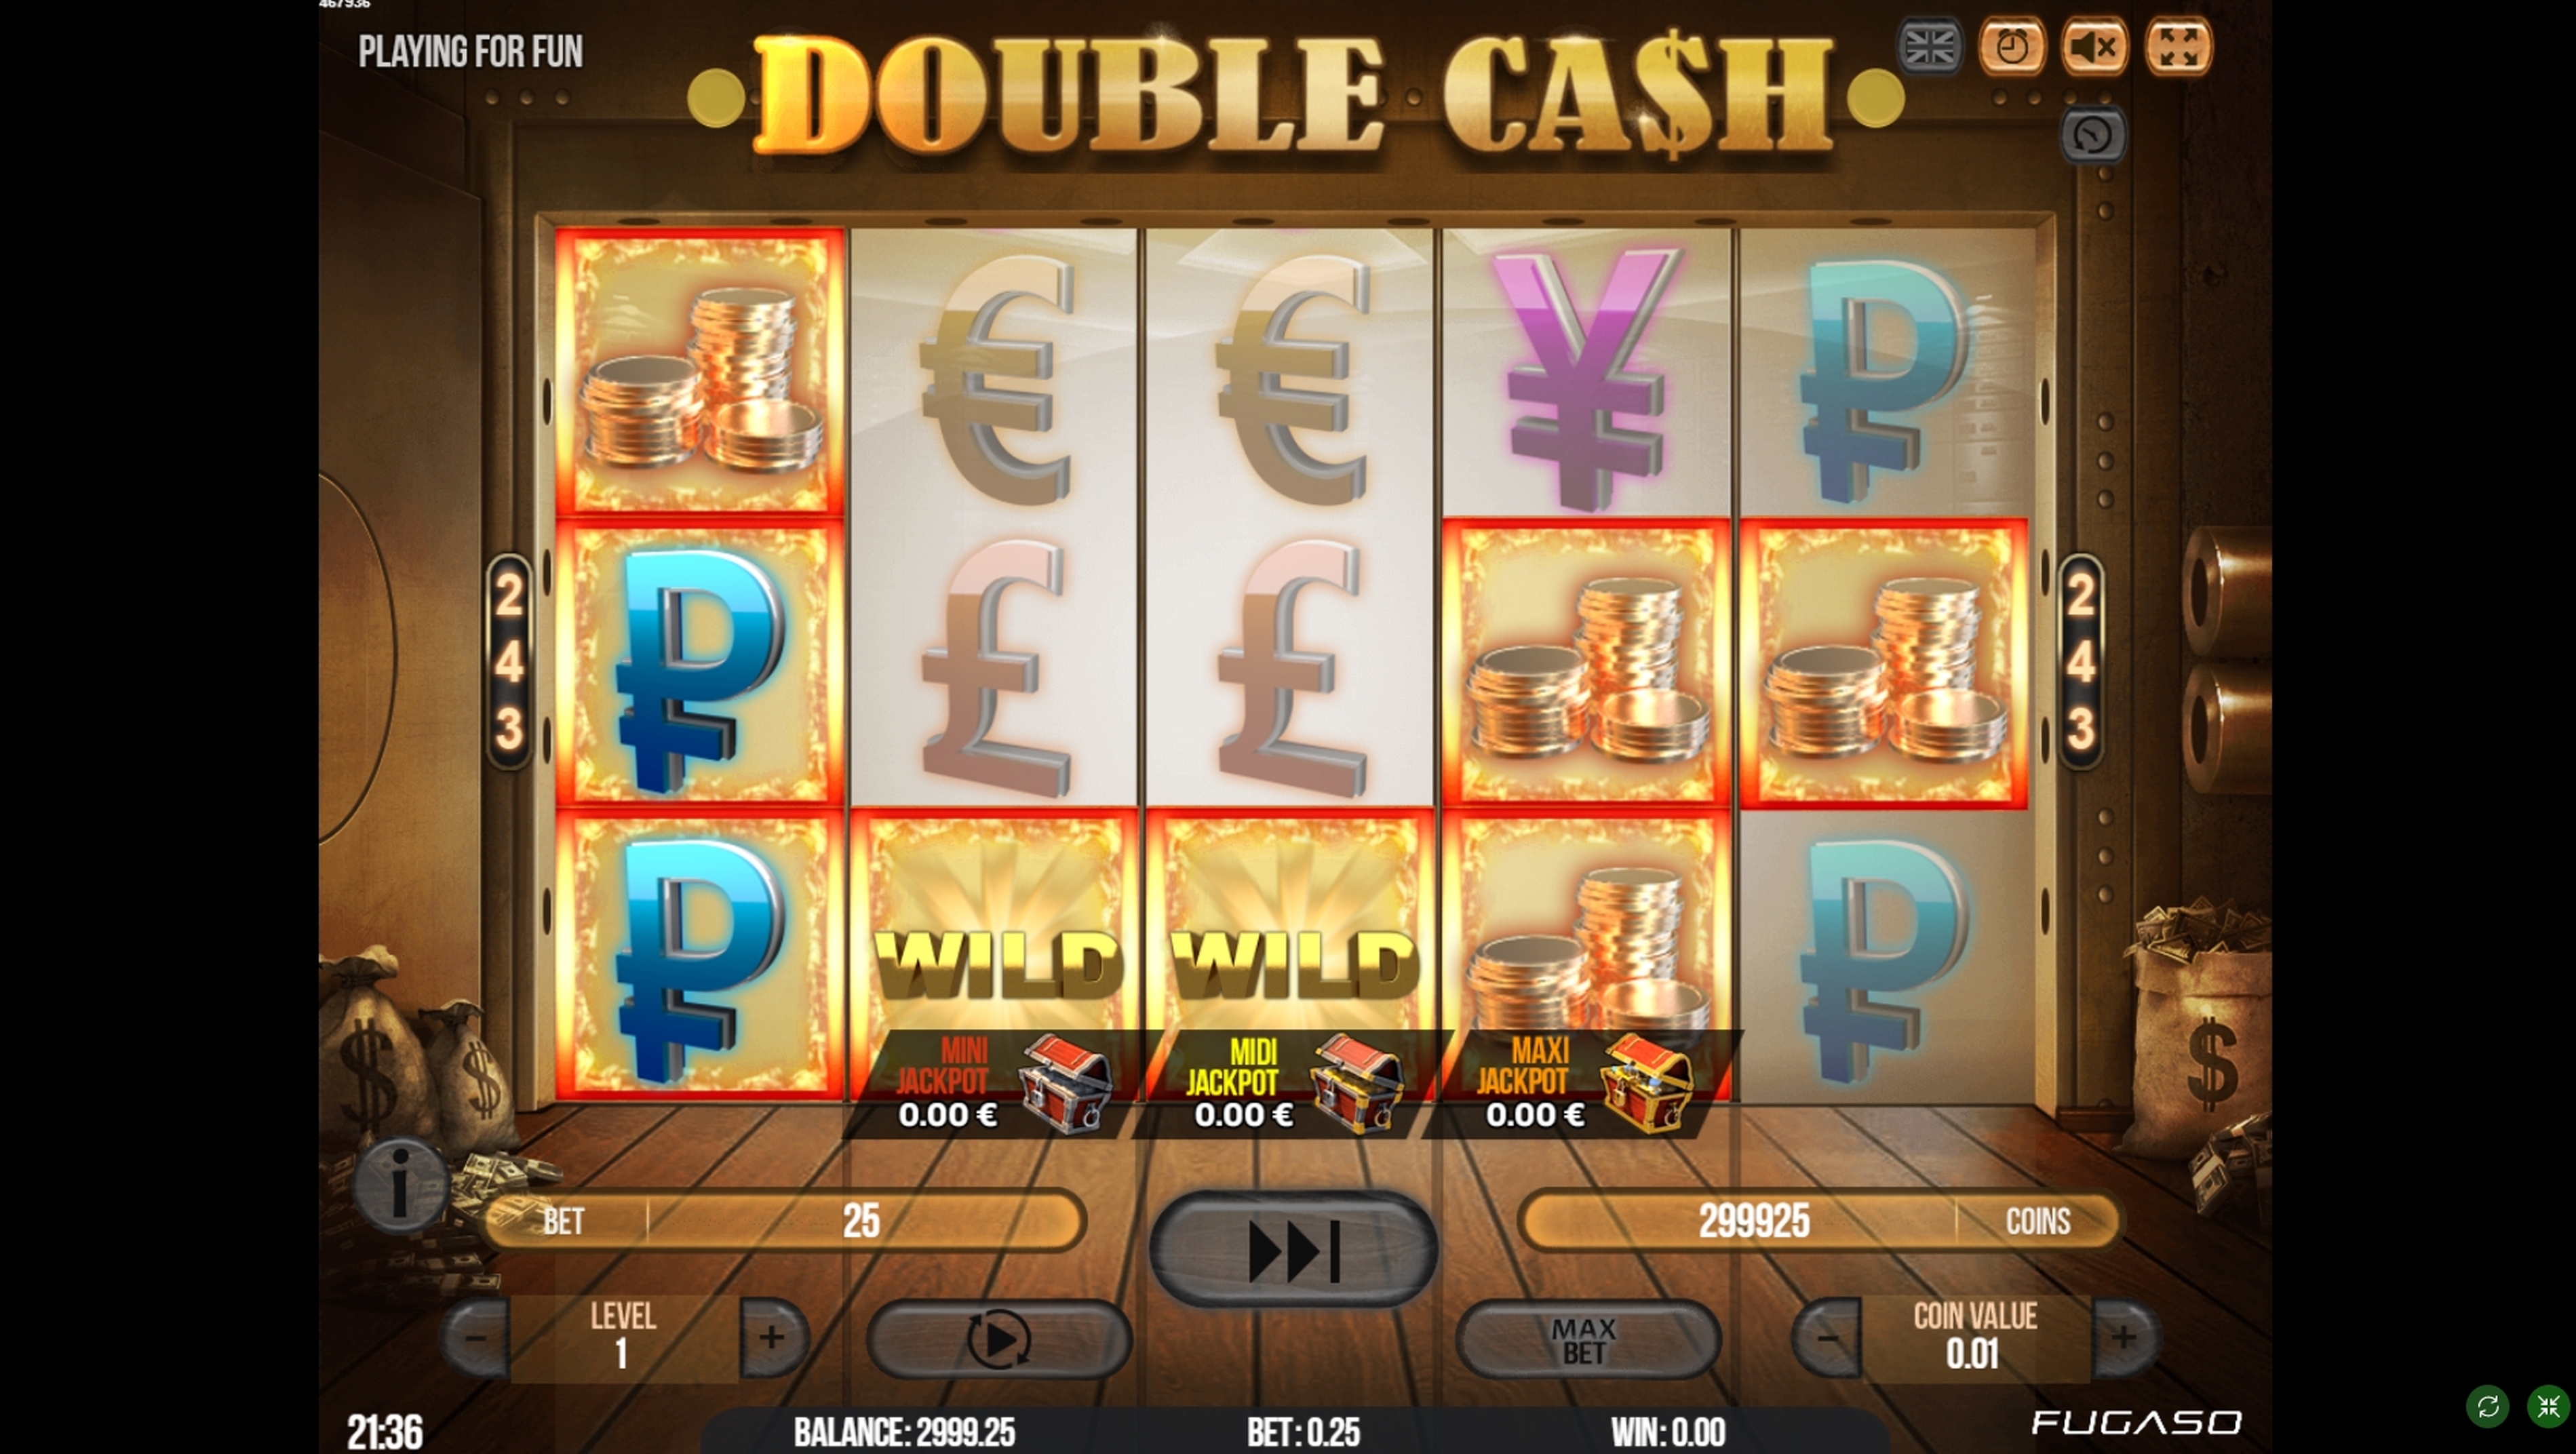 Win Money in Double Cash Free Slot Game by Fugaso